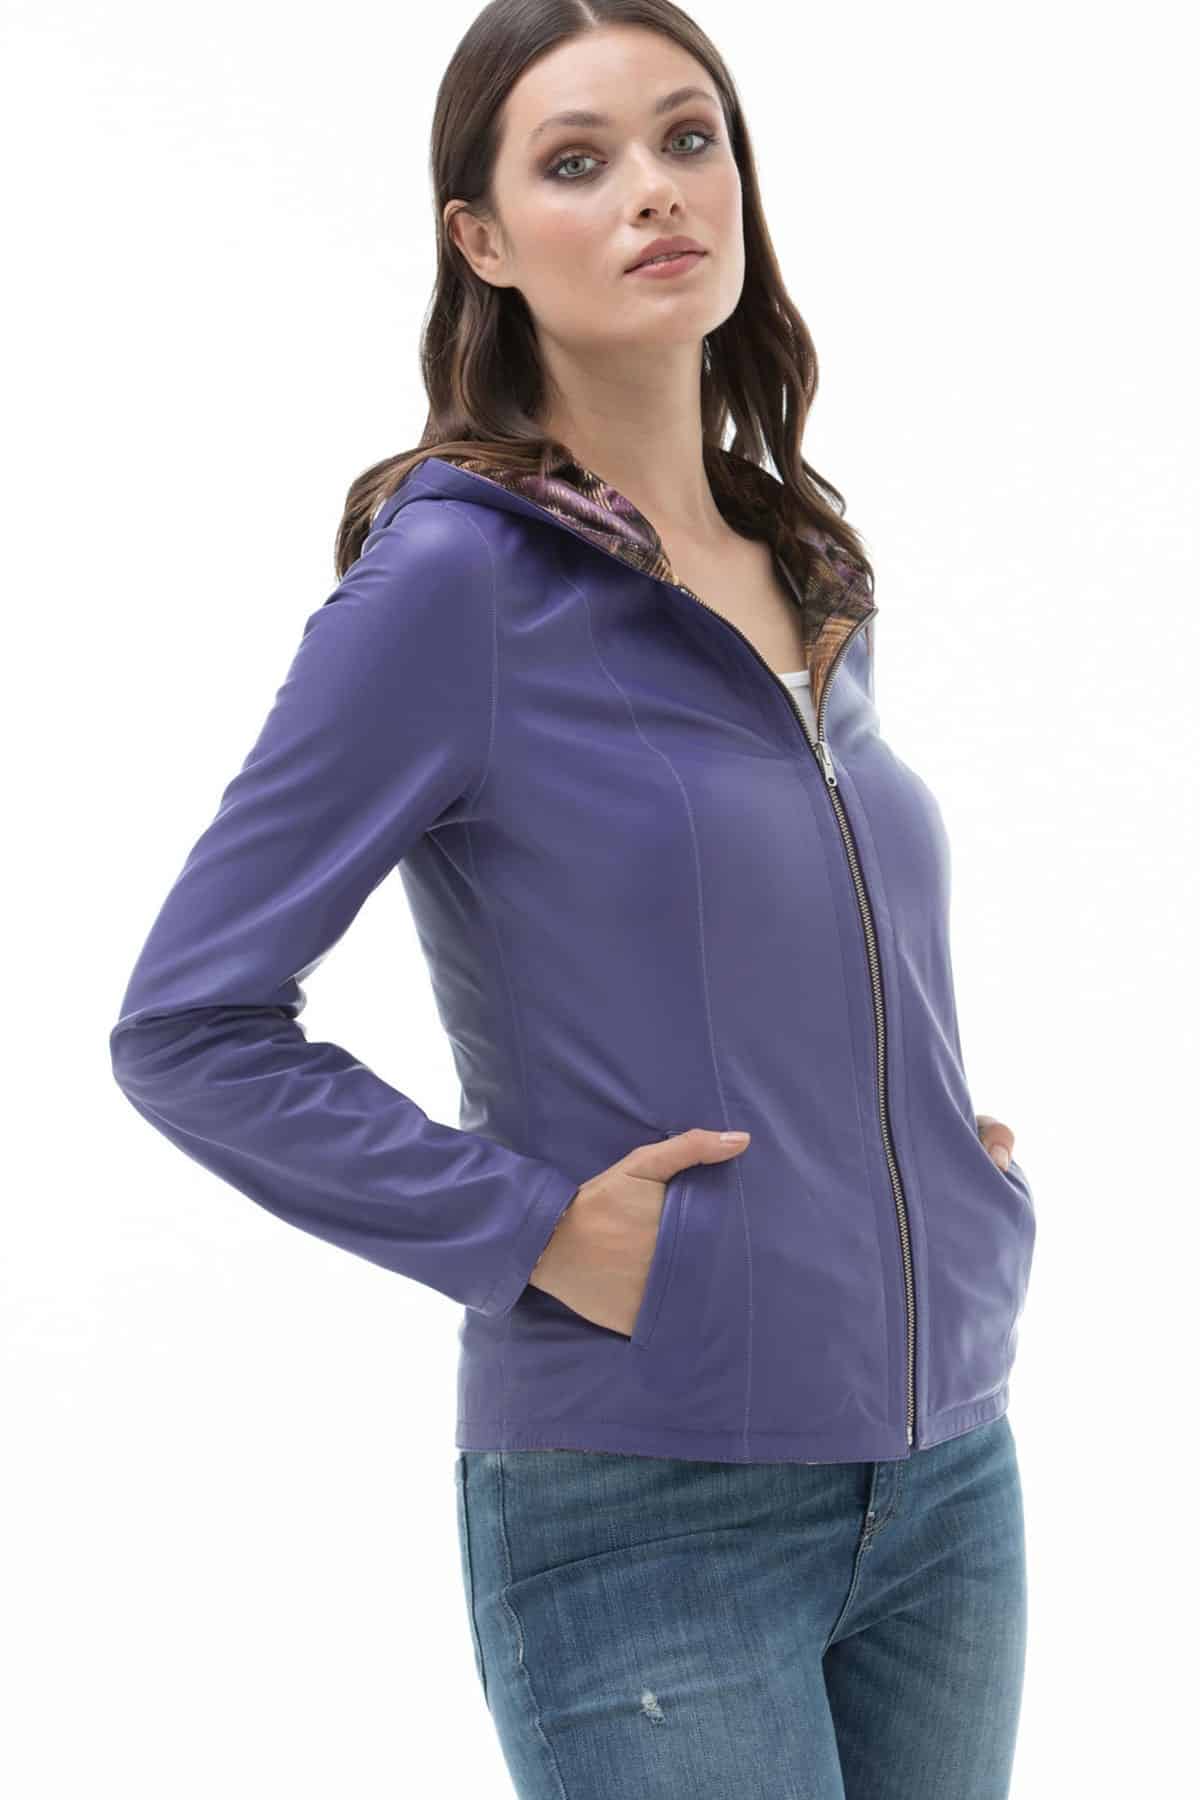 Womens Two in One Lilac Purple Leather Hooded Jacket Side